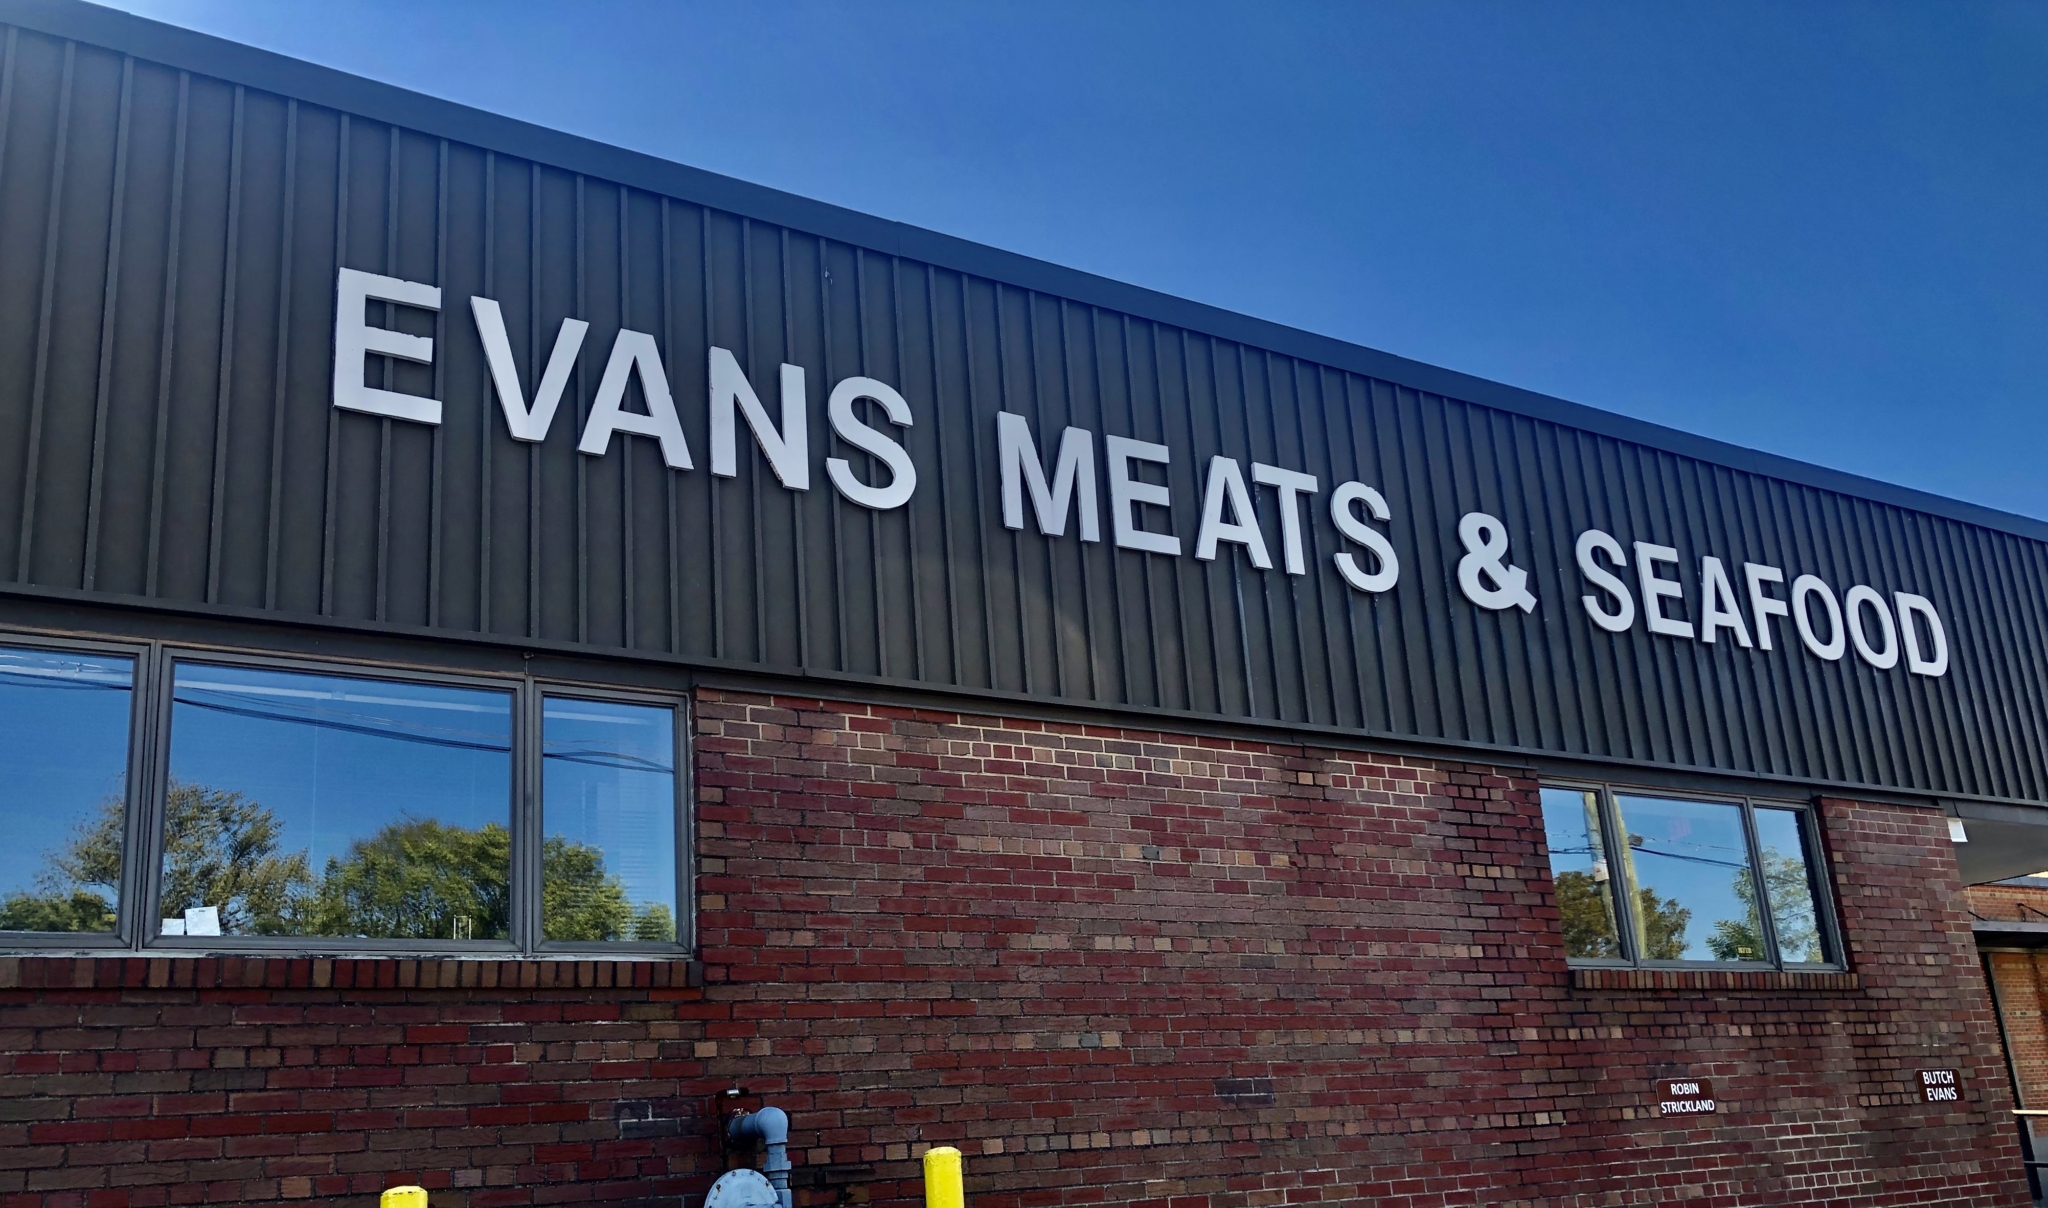 Evans Meats 5 Birmingham’s Evans Meats and Seafood expanding into Pepper Place